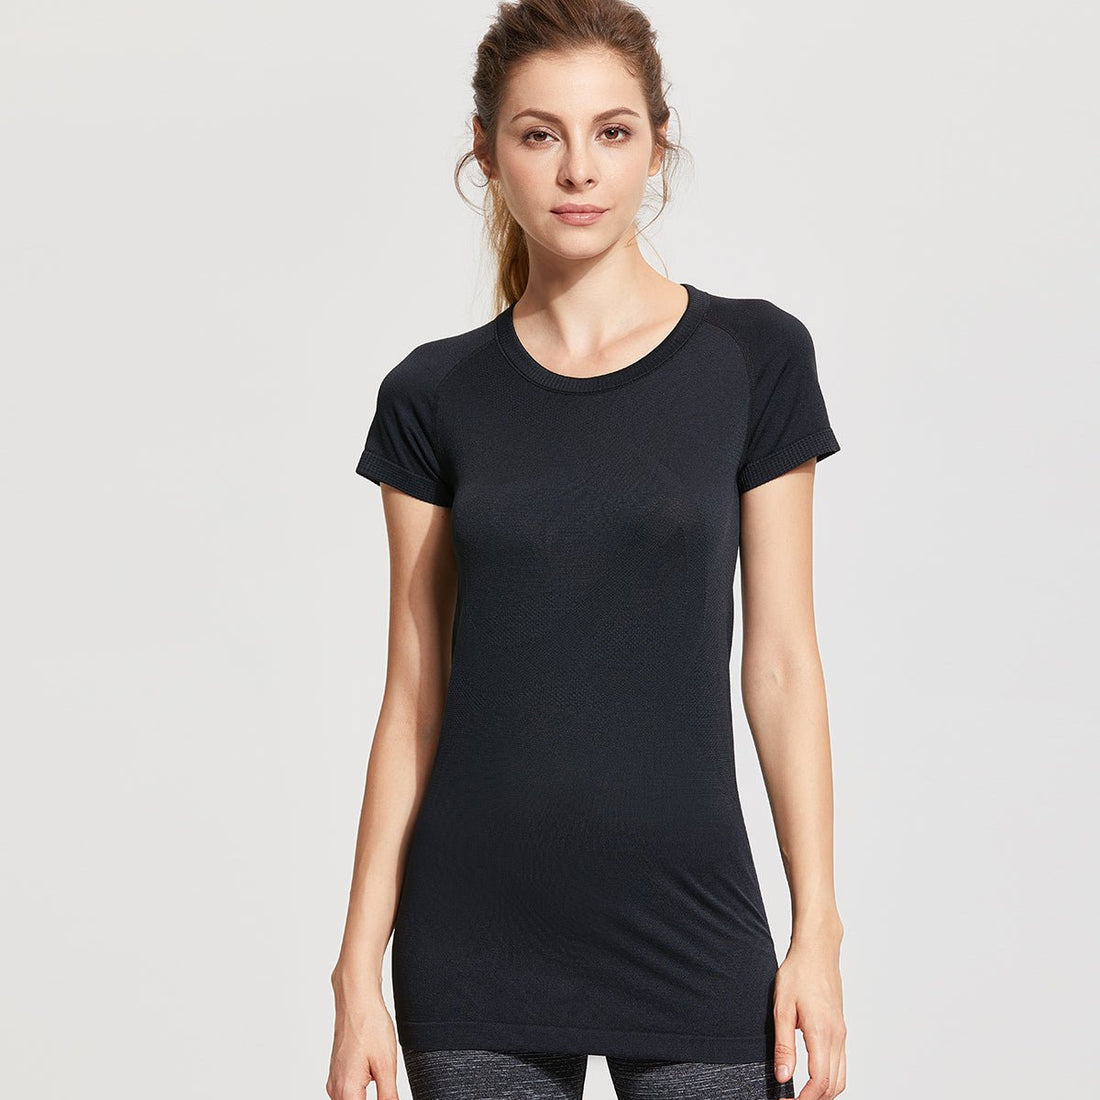 Quick Dry Breathable Seamless Black Workout Tee - 0cm